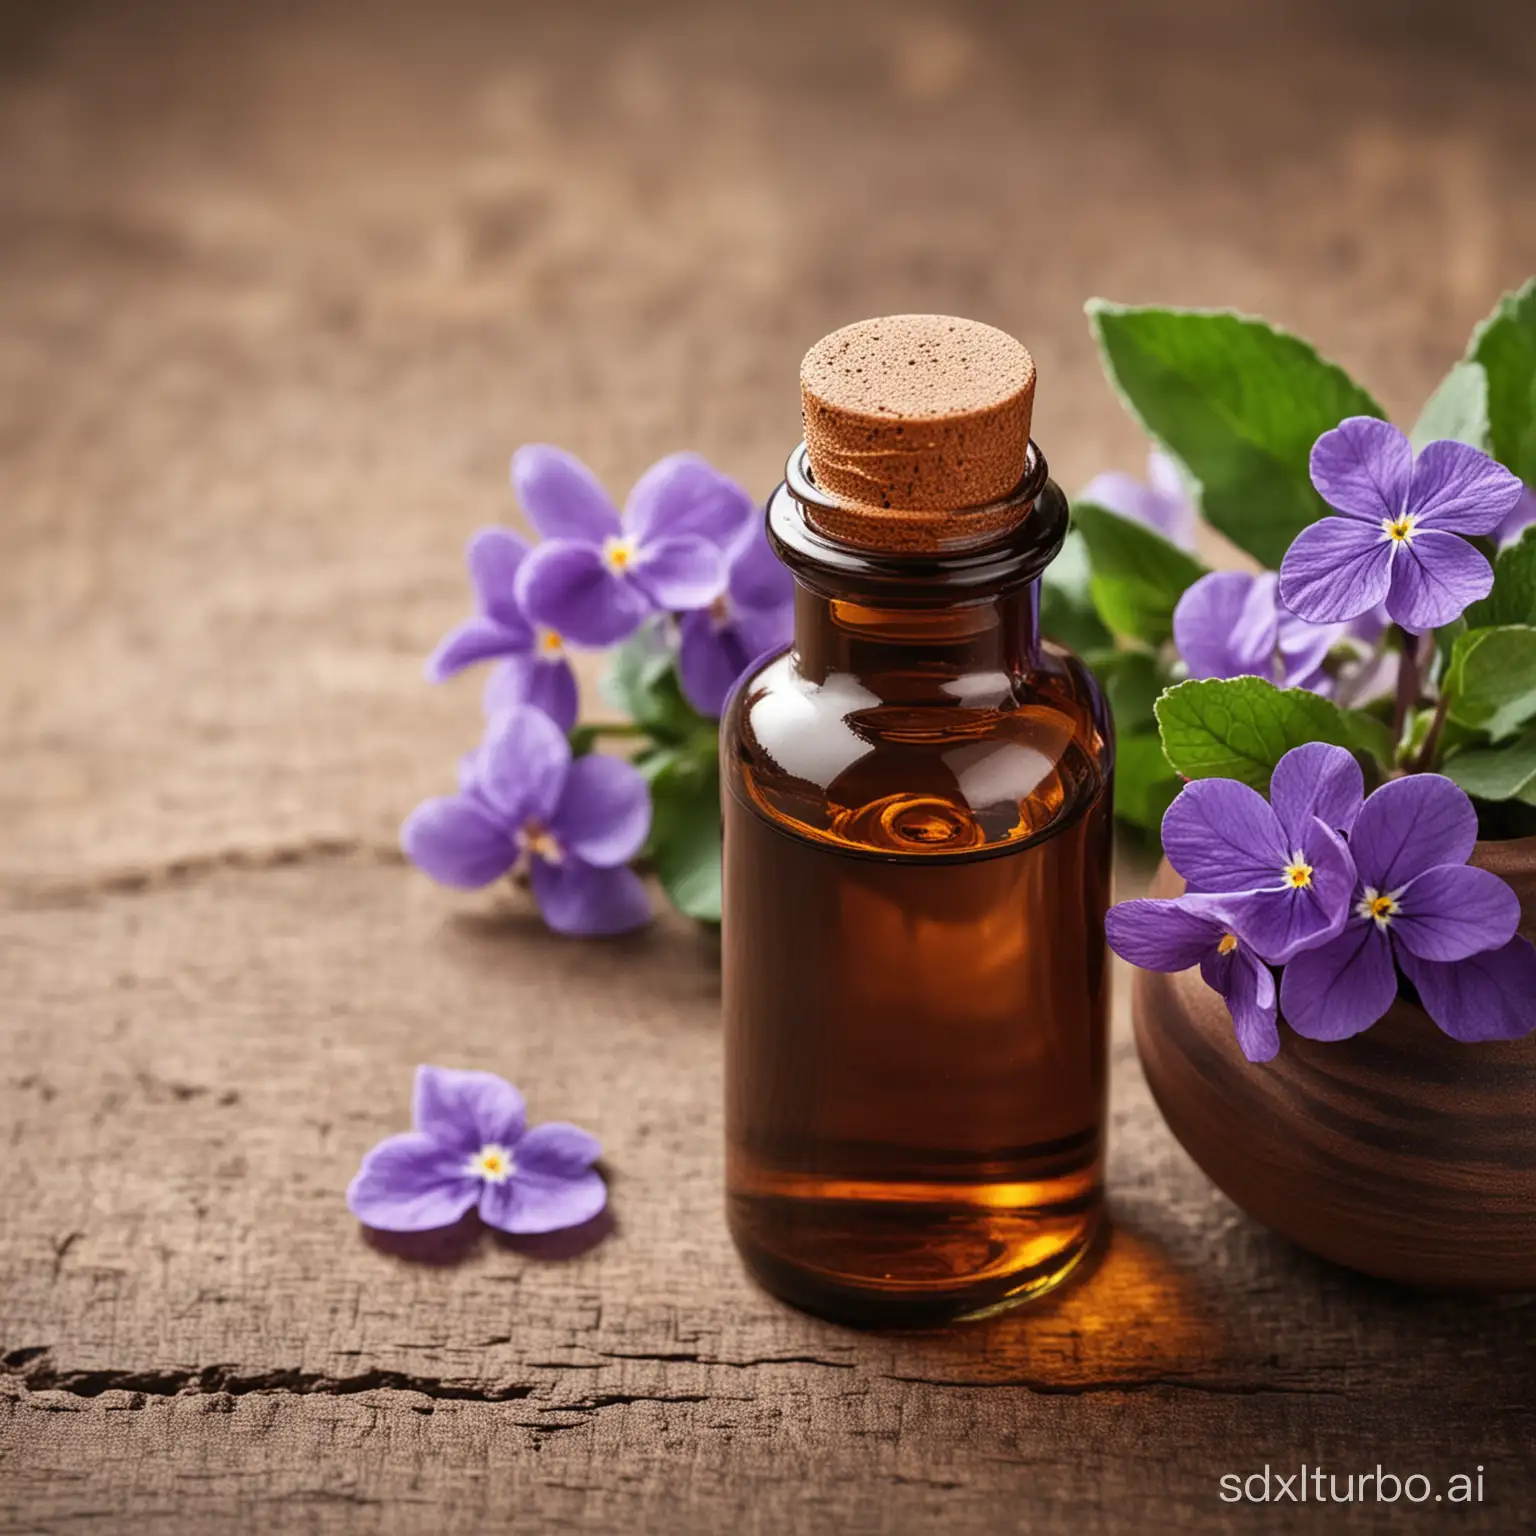 A brown essential oil bottle with violets, size: 1920*1080